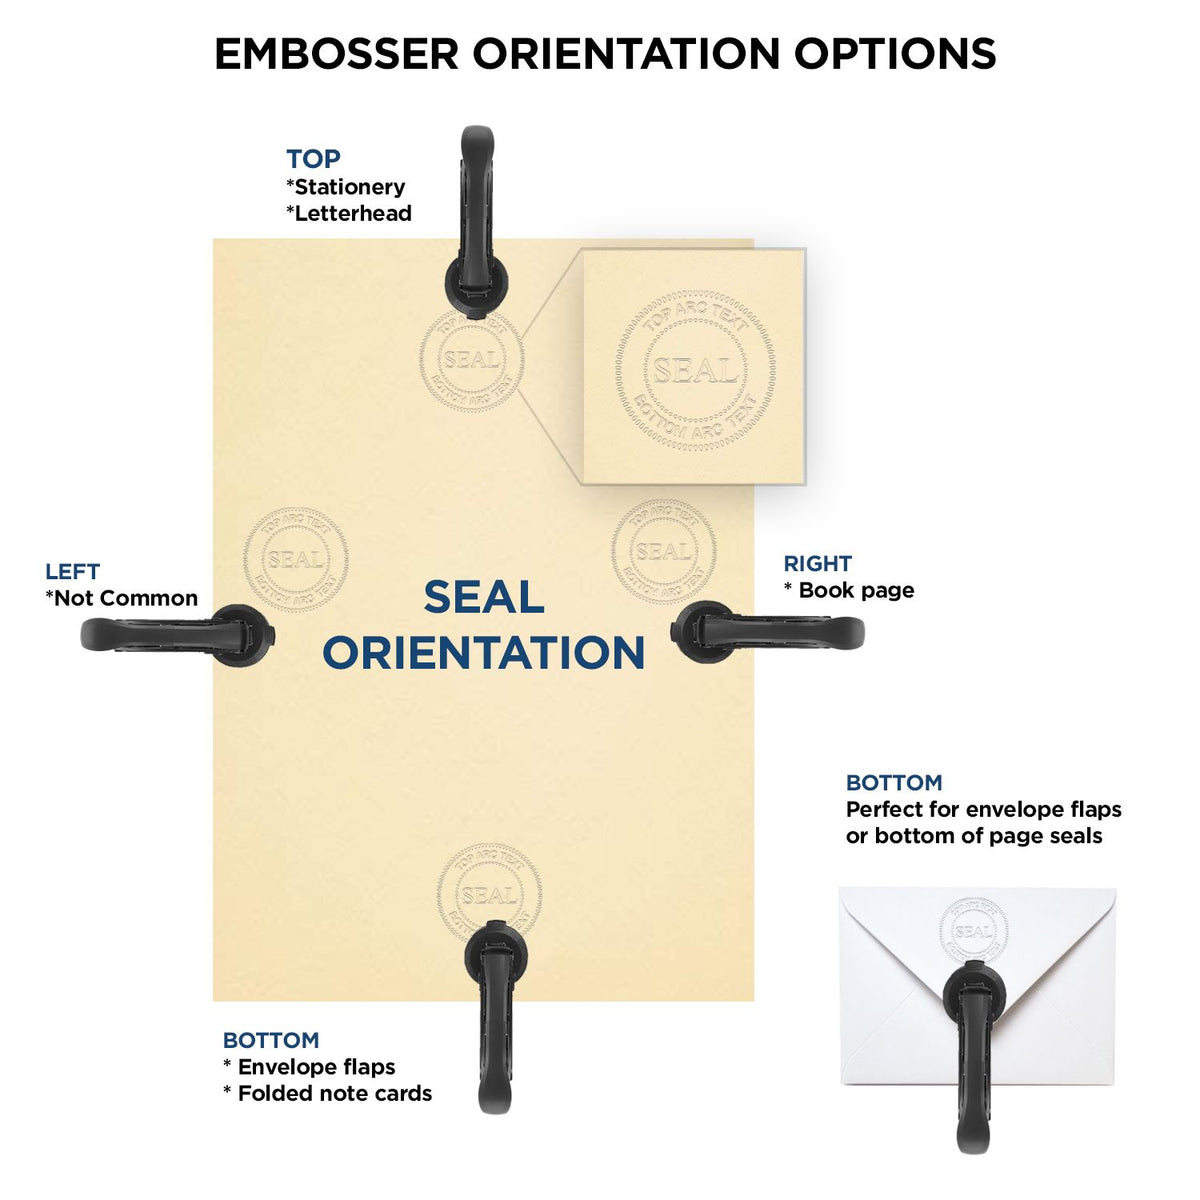 An infographic for the Long Reach Texas PE Seal showing embosser orientation, this is showing examples of a top, bottom, right and left insert.